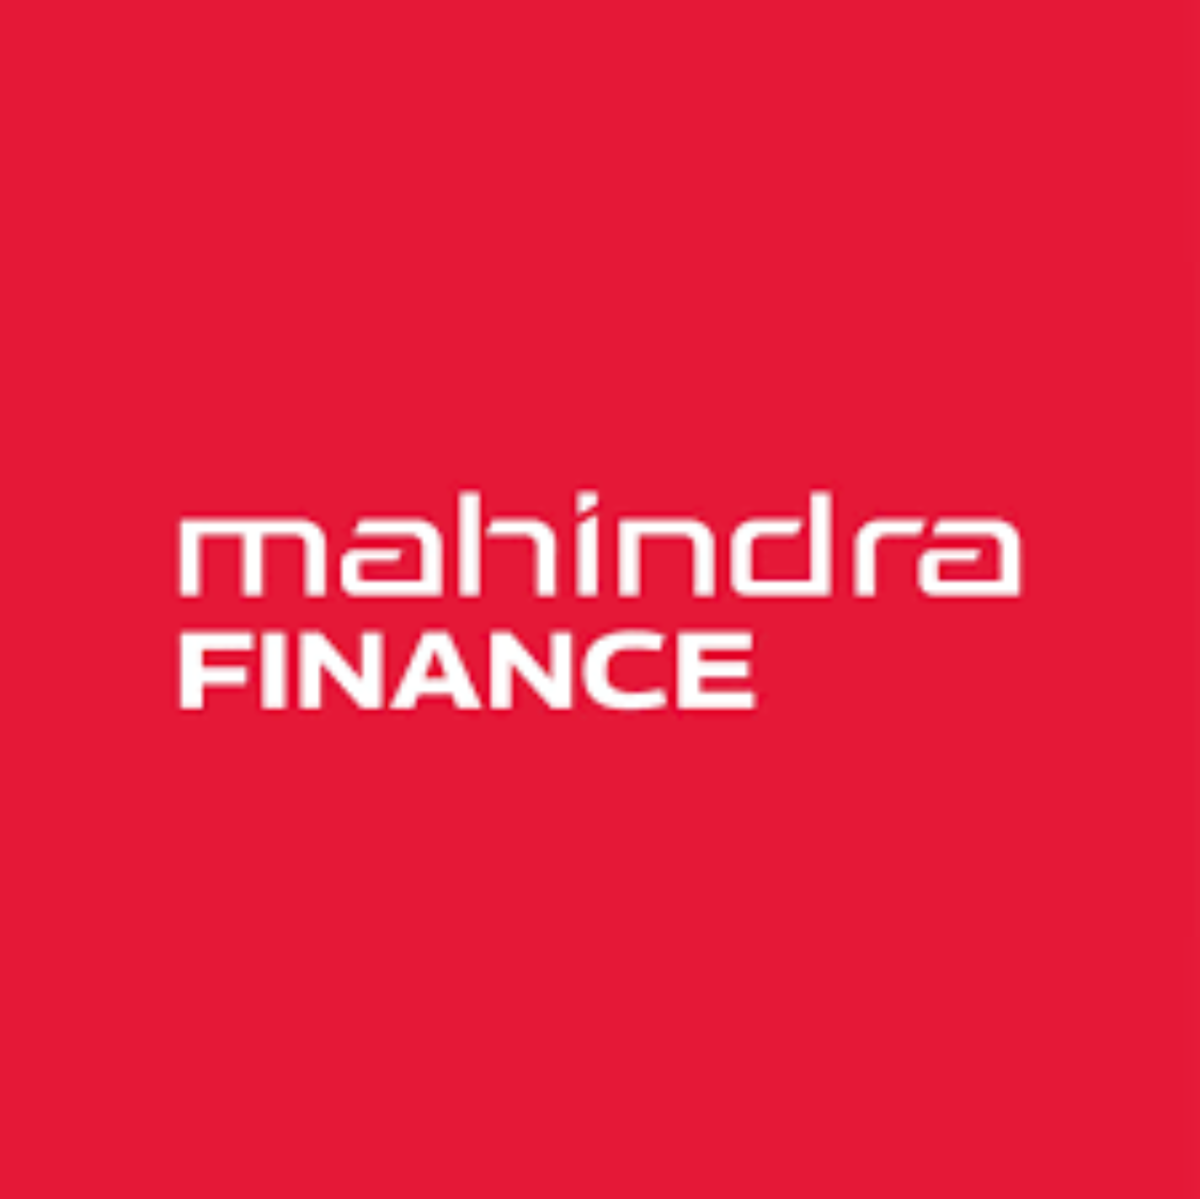 What do the three lines in the Mahindra logo symbolise? - Quora